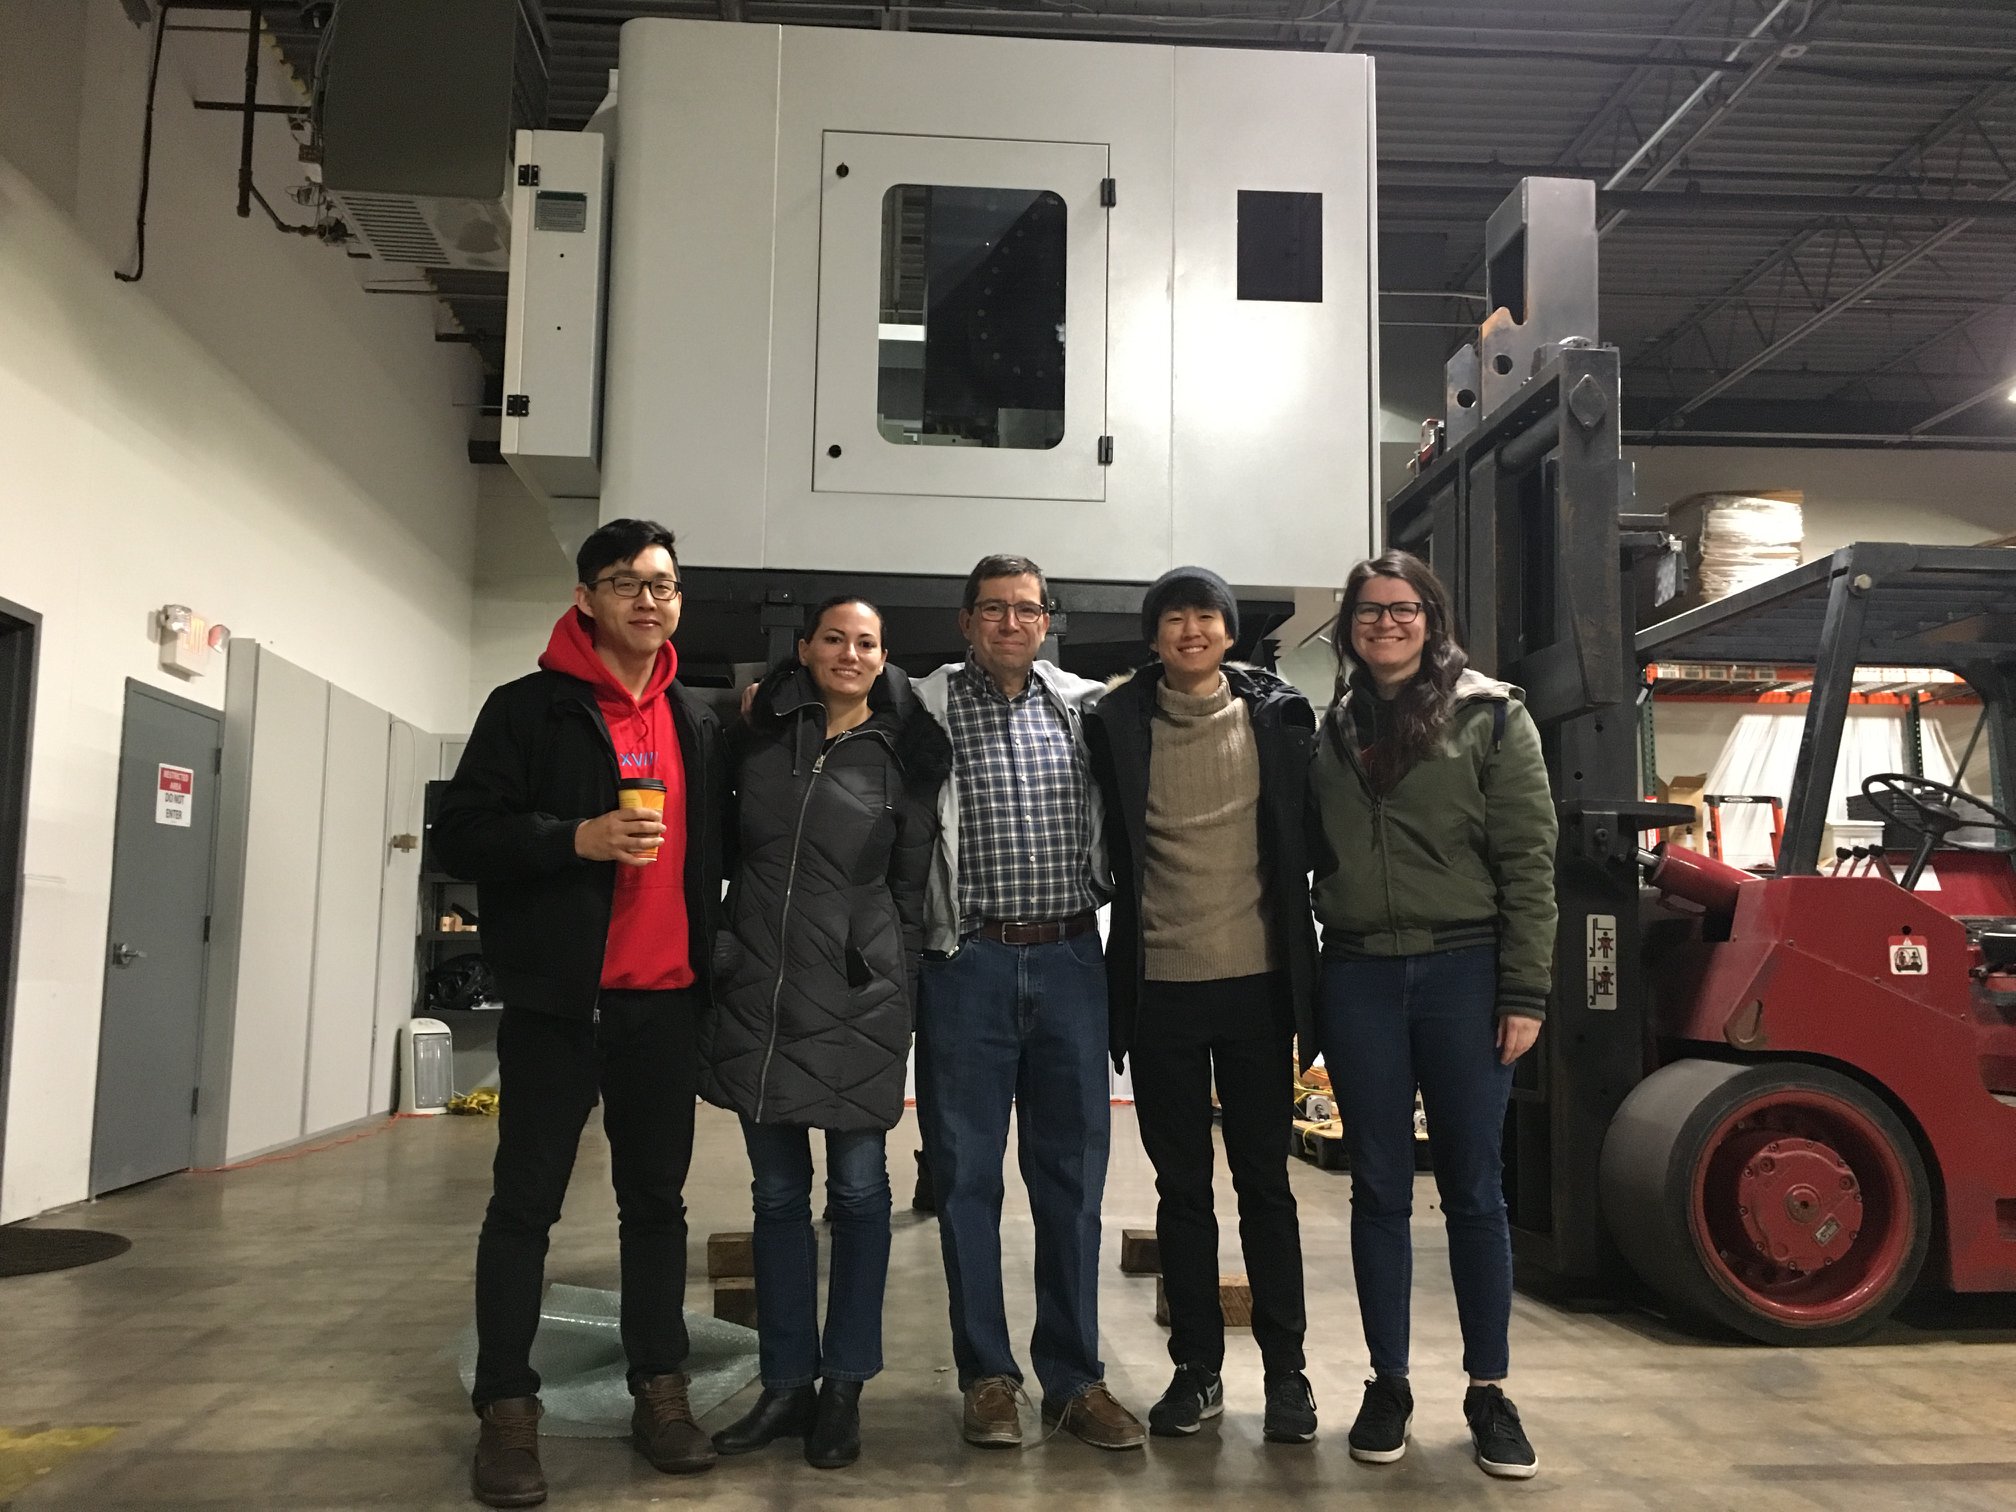 The founder and four employees standing in a warehouse